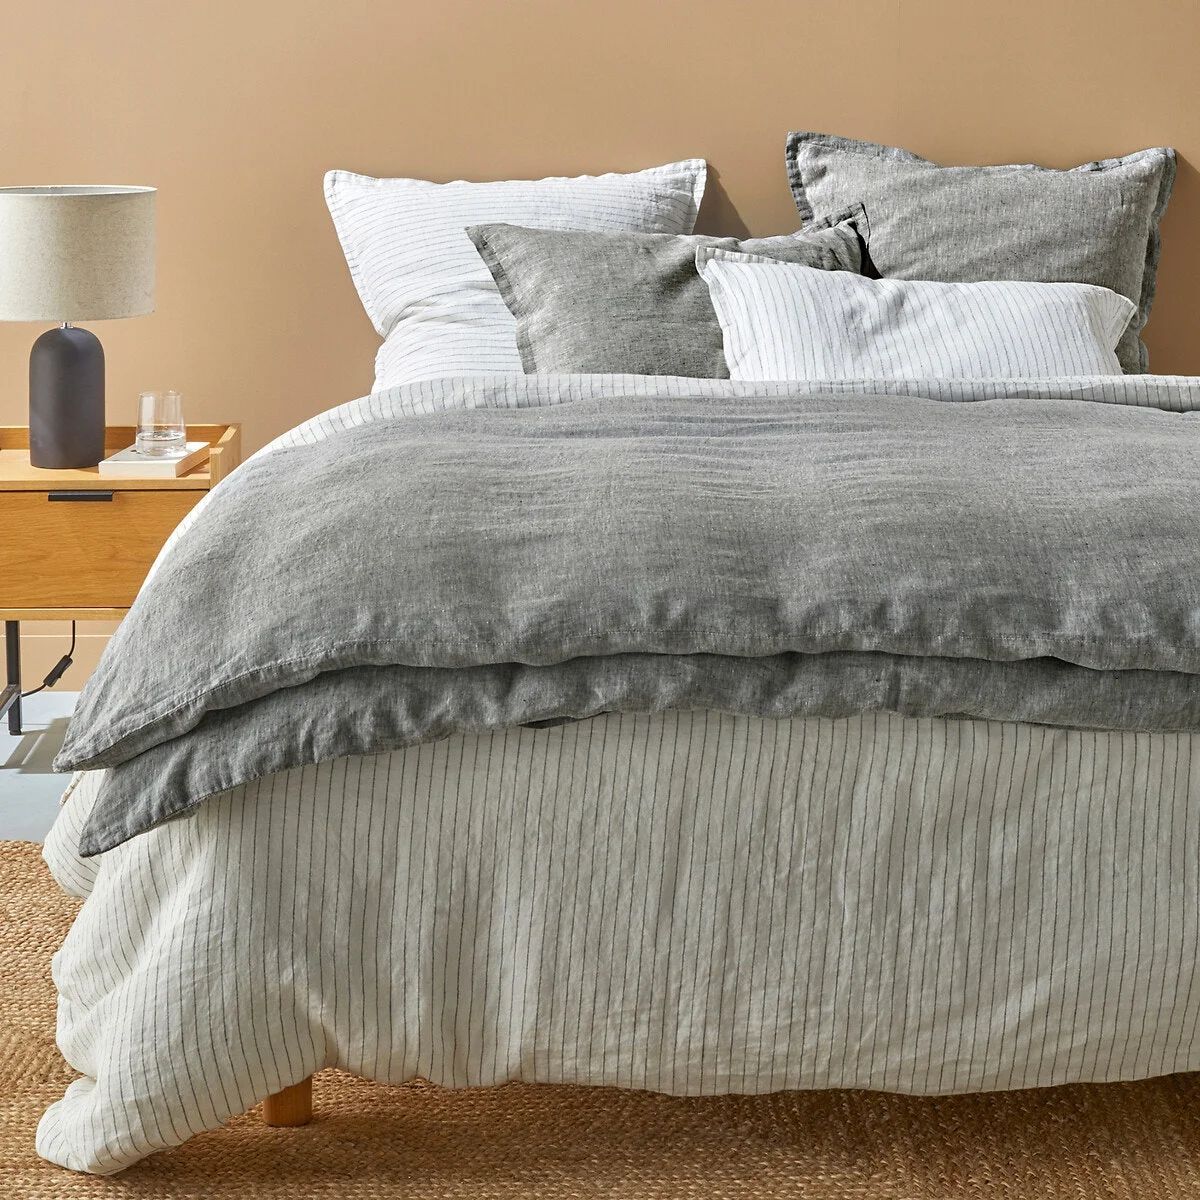 Washed Linen Duvet Cover, Striped Linot 